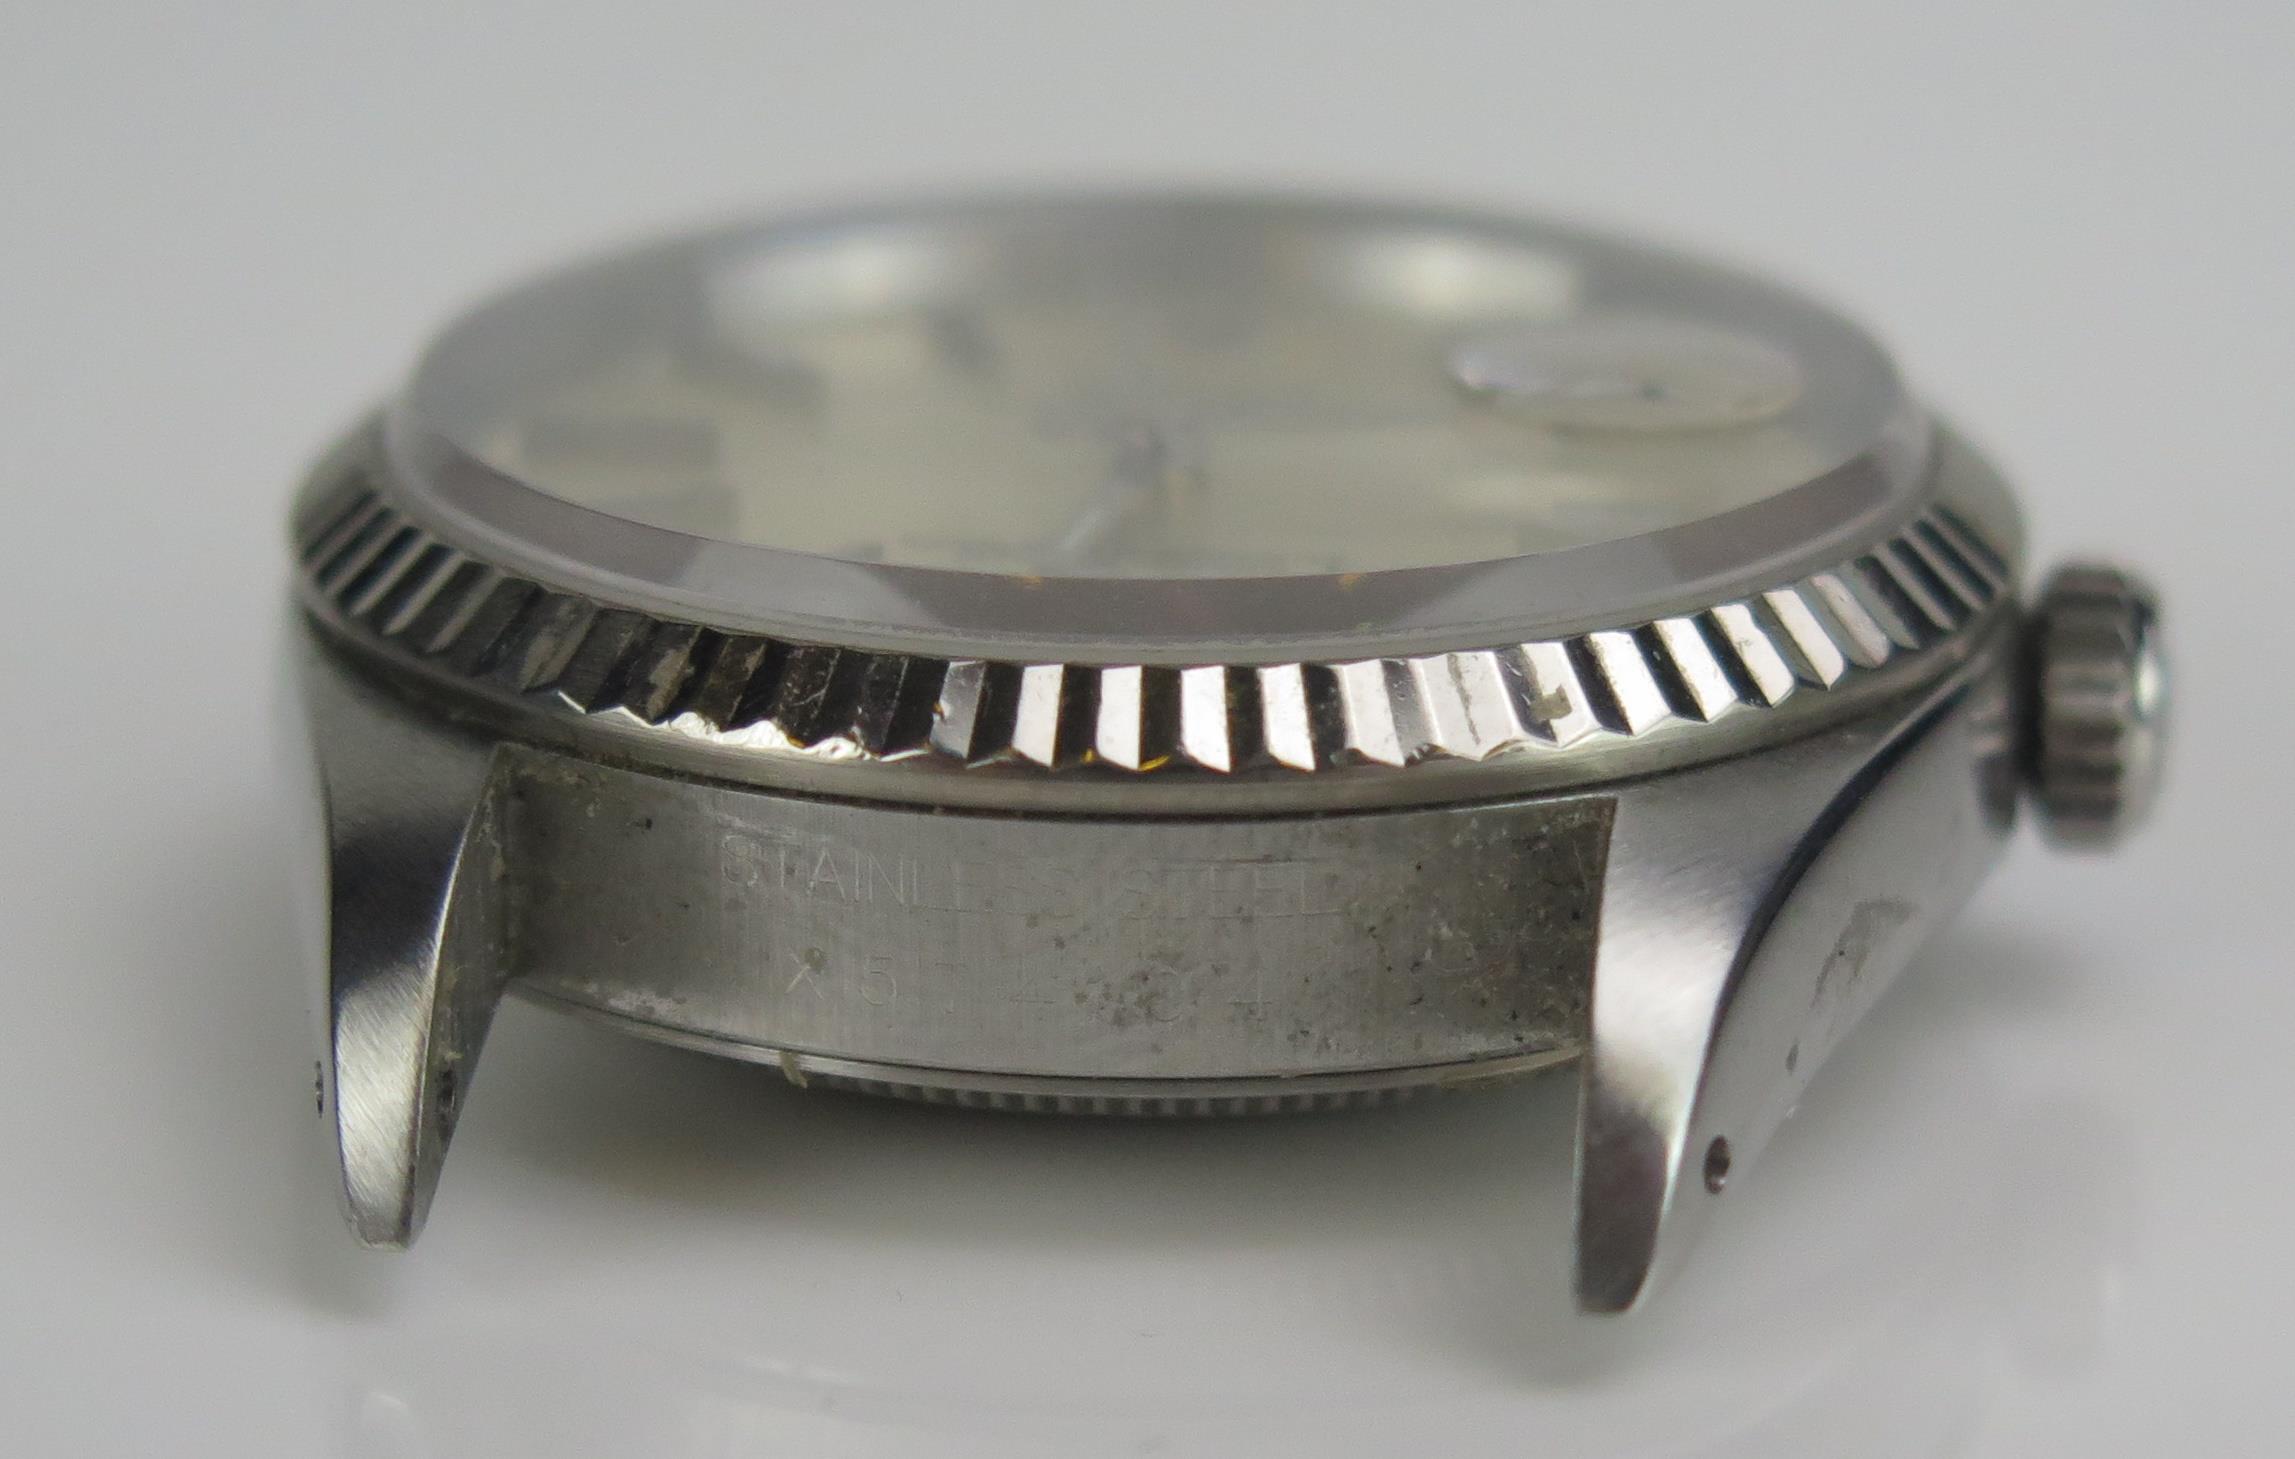 A ROLEX Gent's Oyster Perpetual Datejust S.C.O.C. Steel Cased Wristwatch on a 63600 Jubilee Bracelet - Image 10 of 10